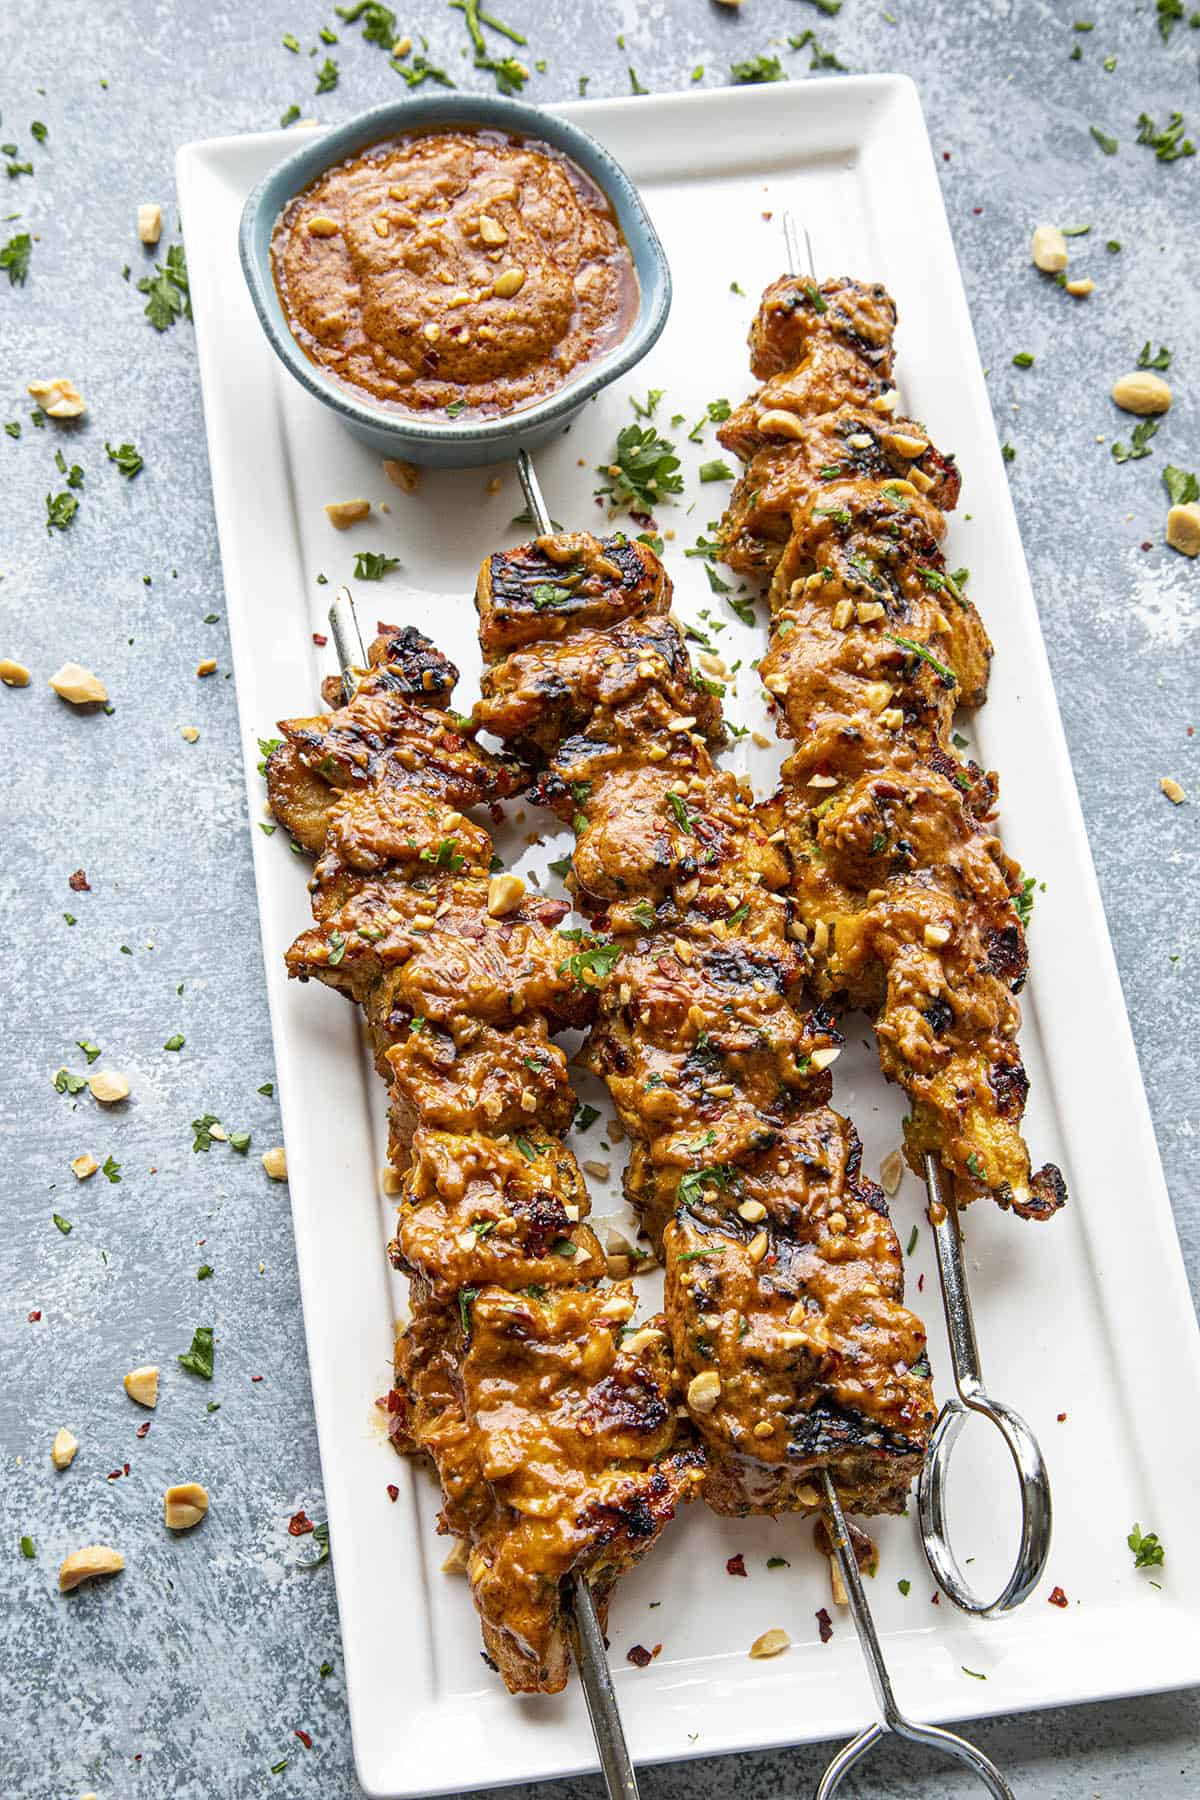 Thai Chicken Satay skewers on a plate, ready to serve